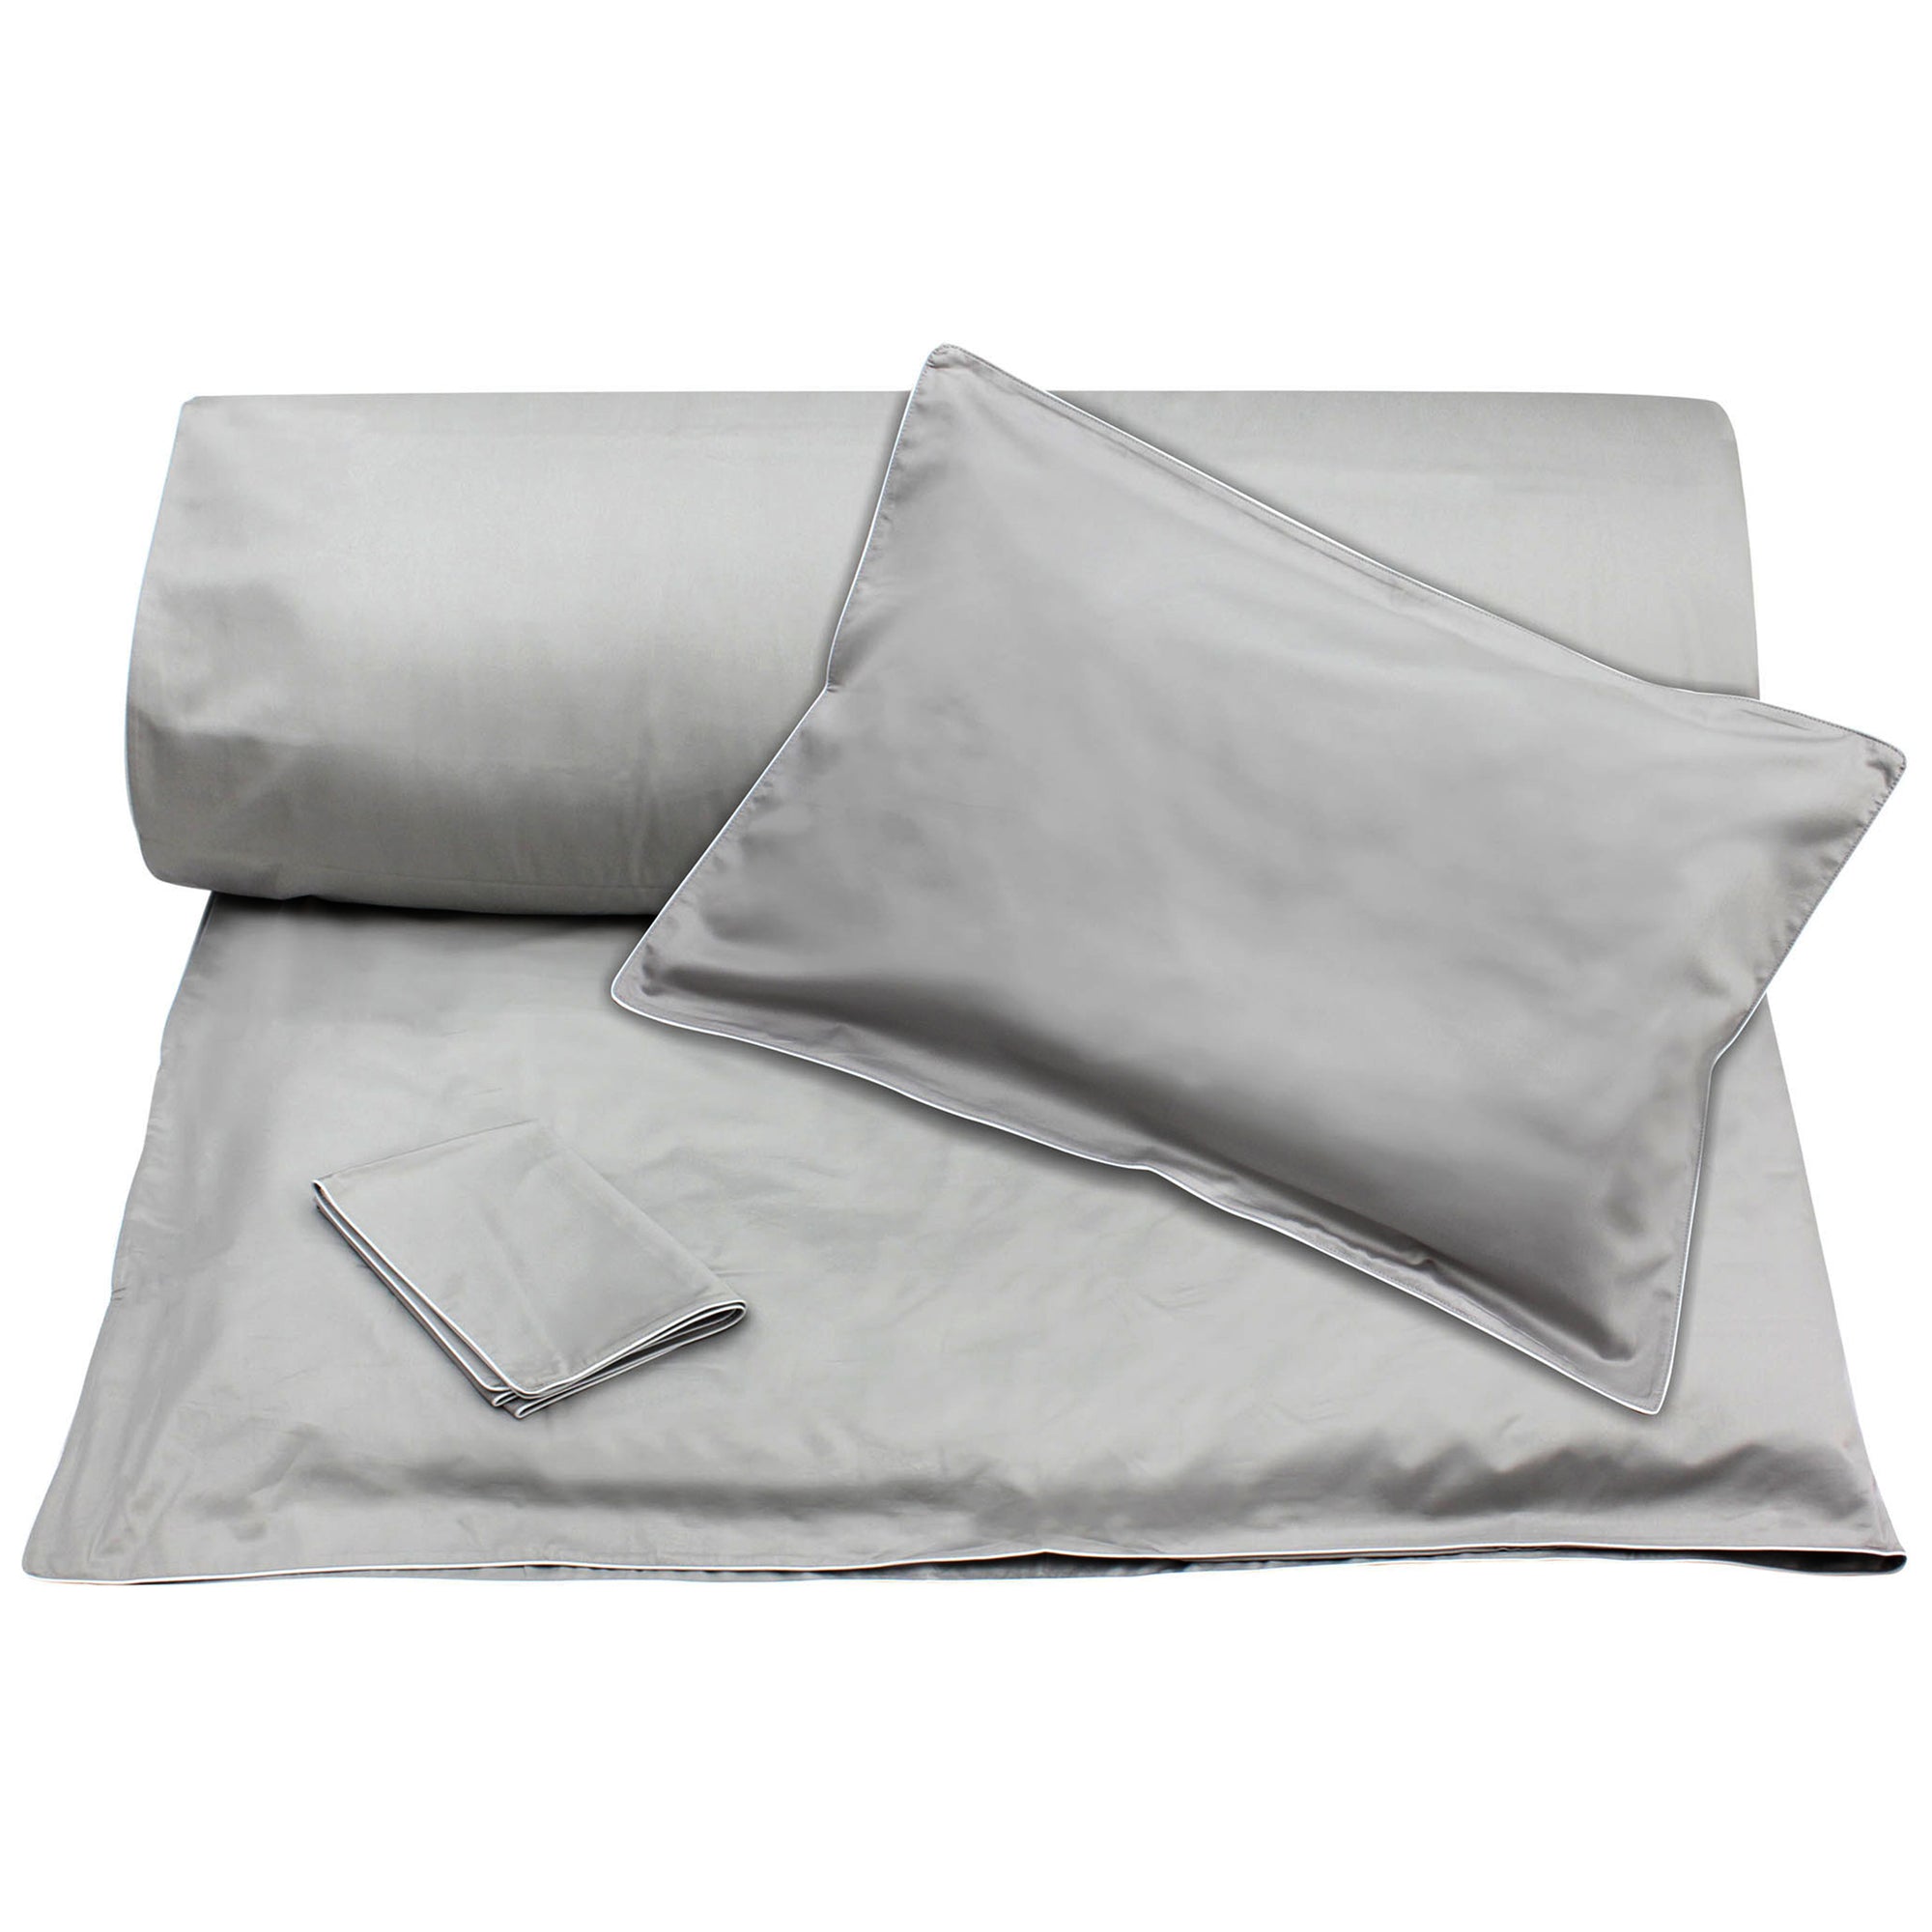 Grey Duvet with White Piping + Pillowcases (600 TC)